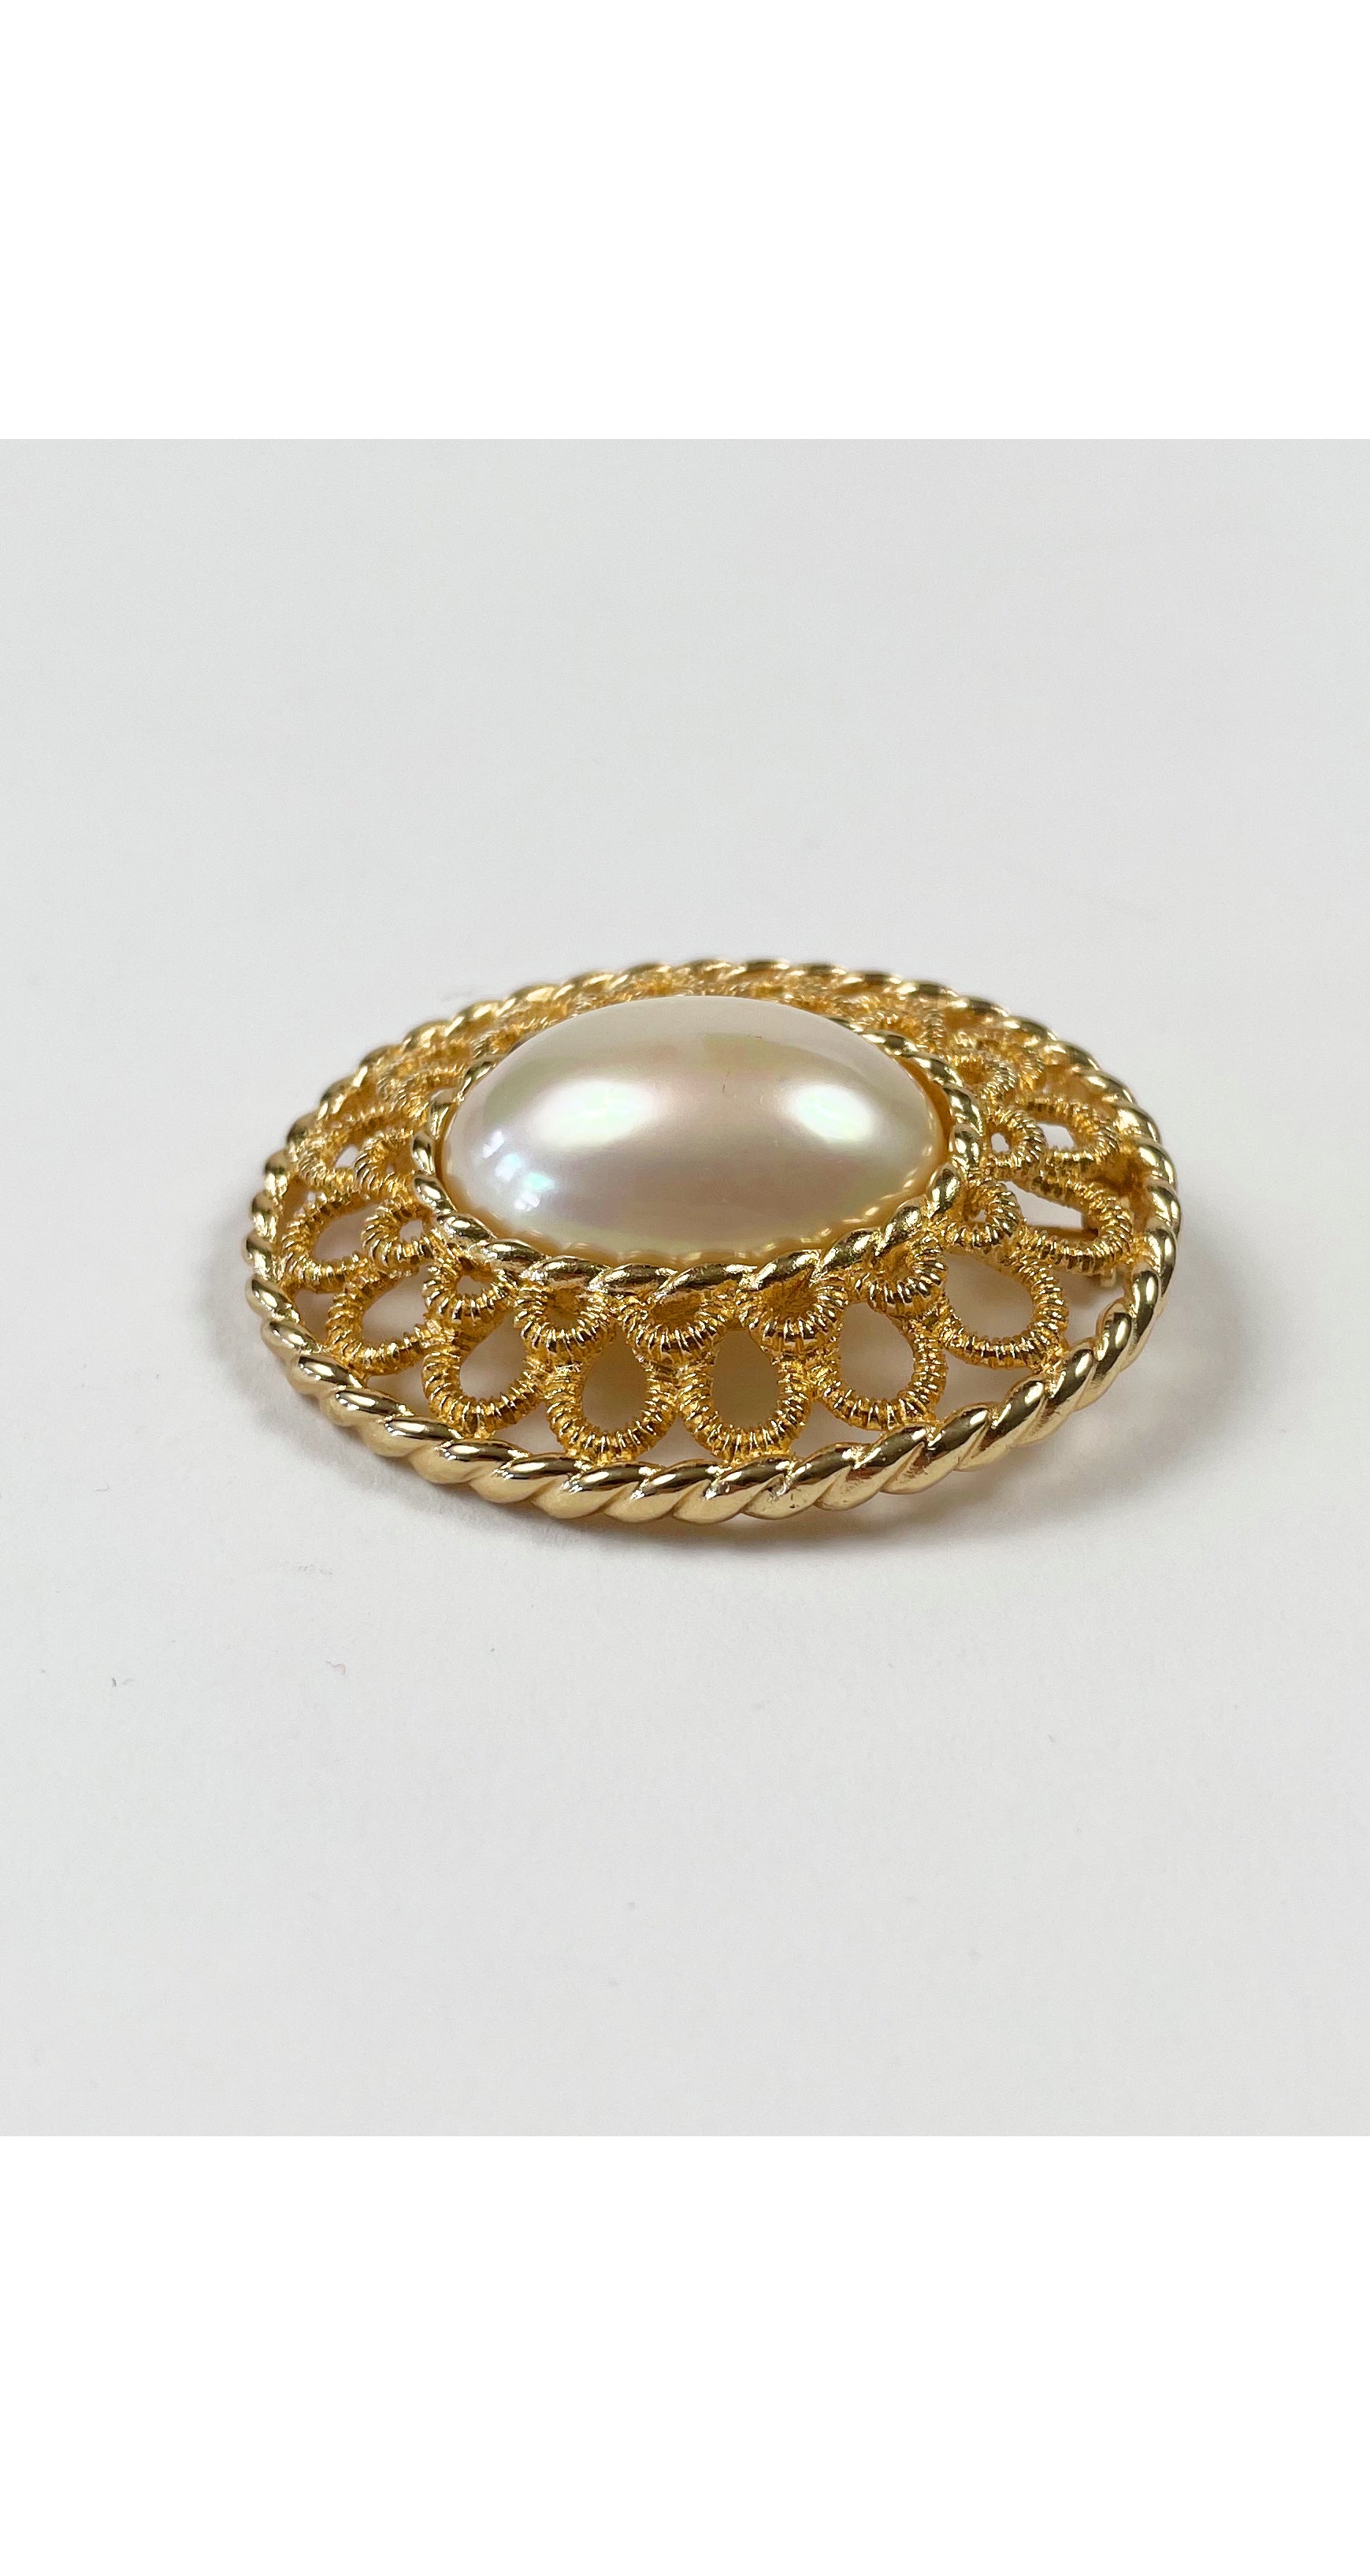 1980s Iridescent Faux Pearl Gold-Tone Brooch